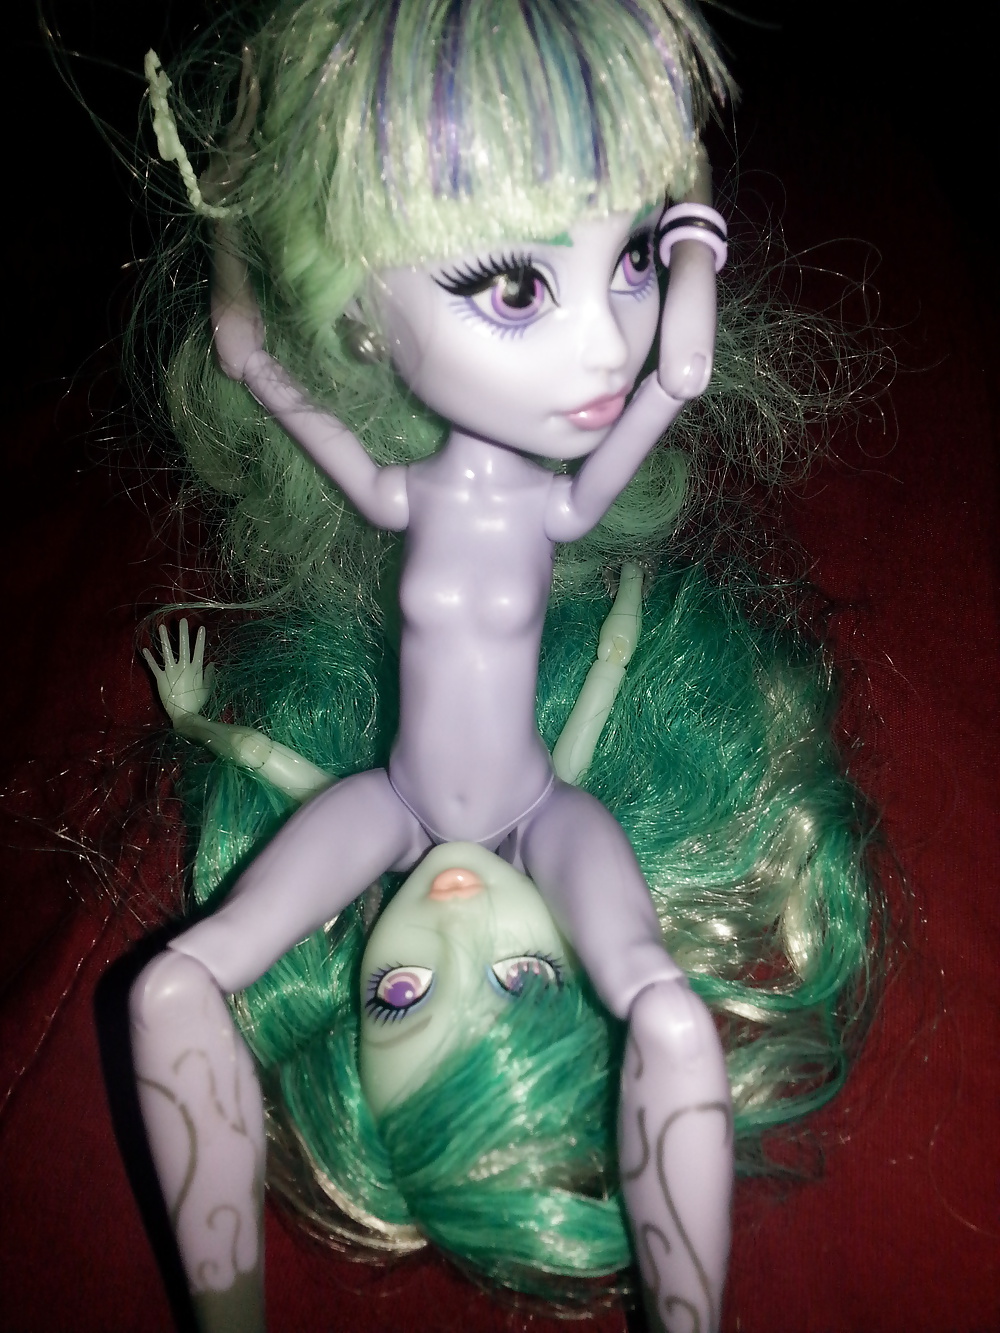 A Monster High Haunting (Dolls) #39635715